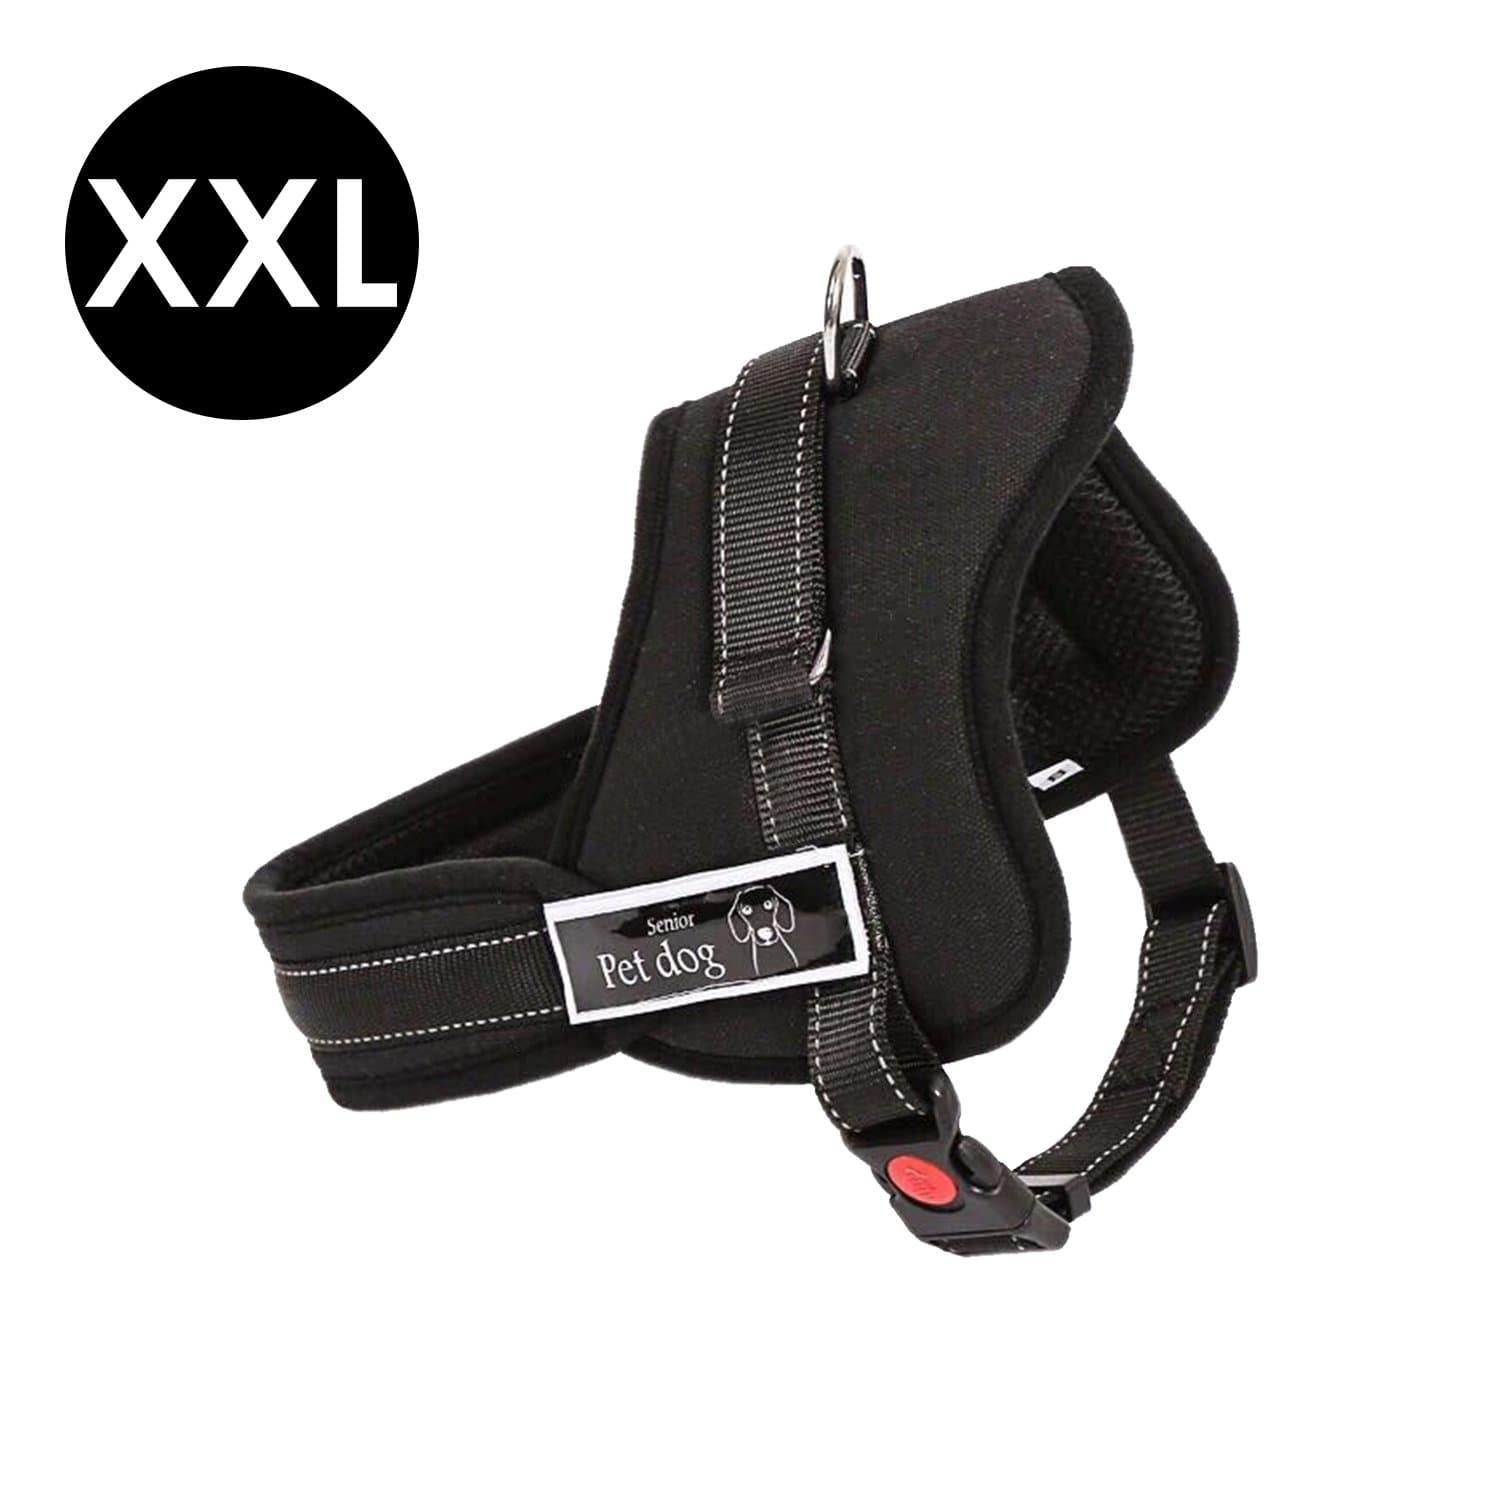 pet products Adjustable Pet Training Control Safety Hand Strap Size Xxl